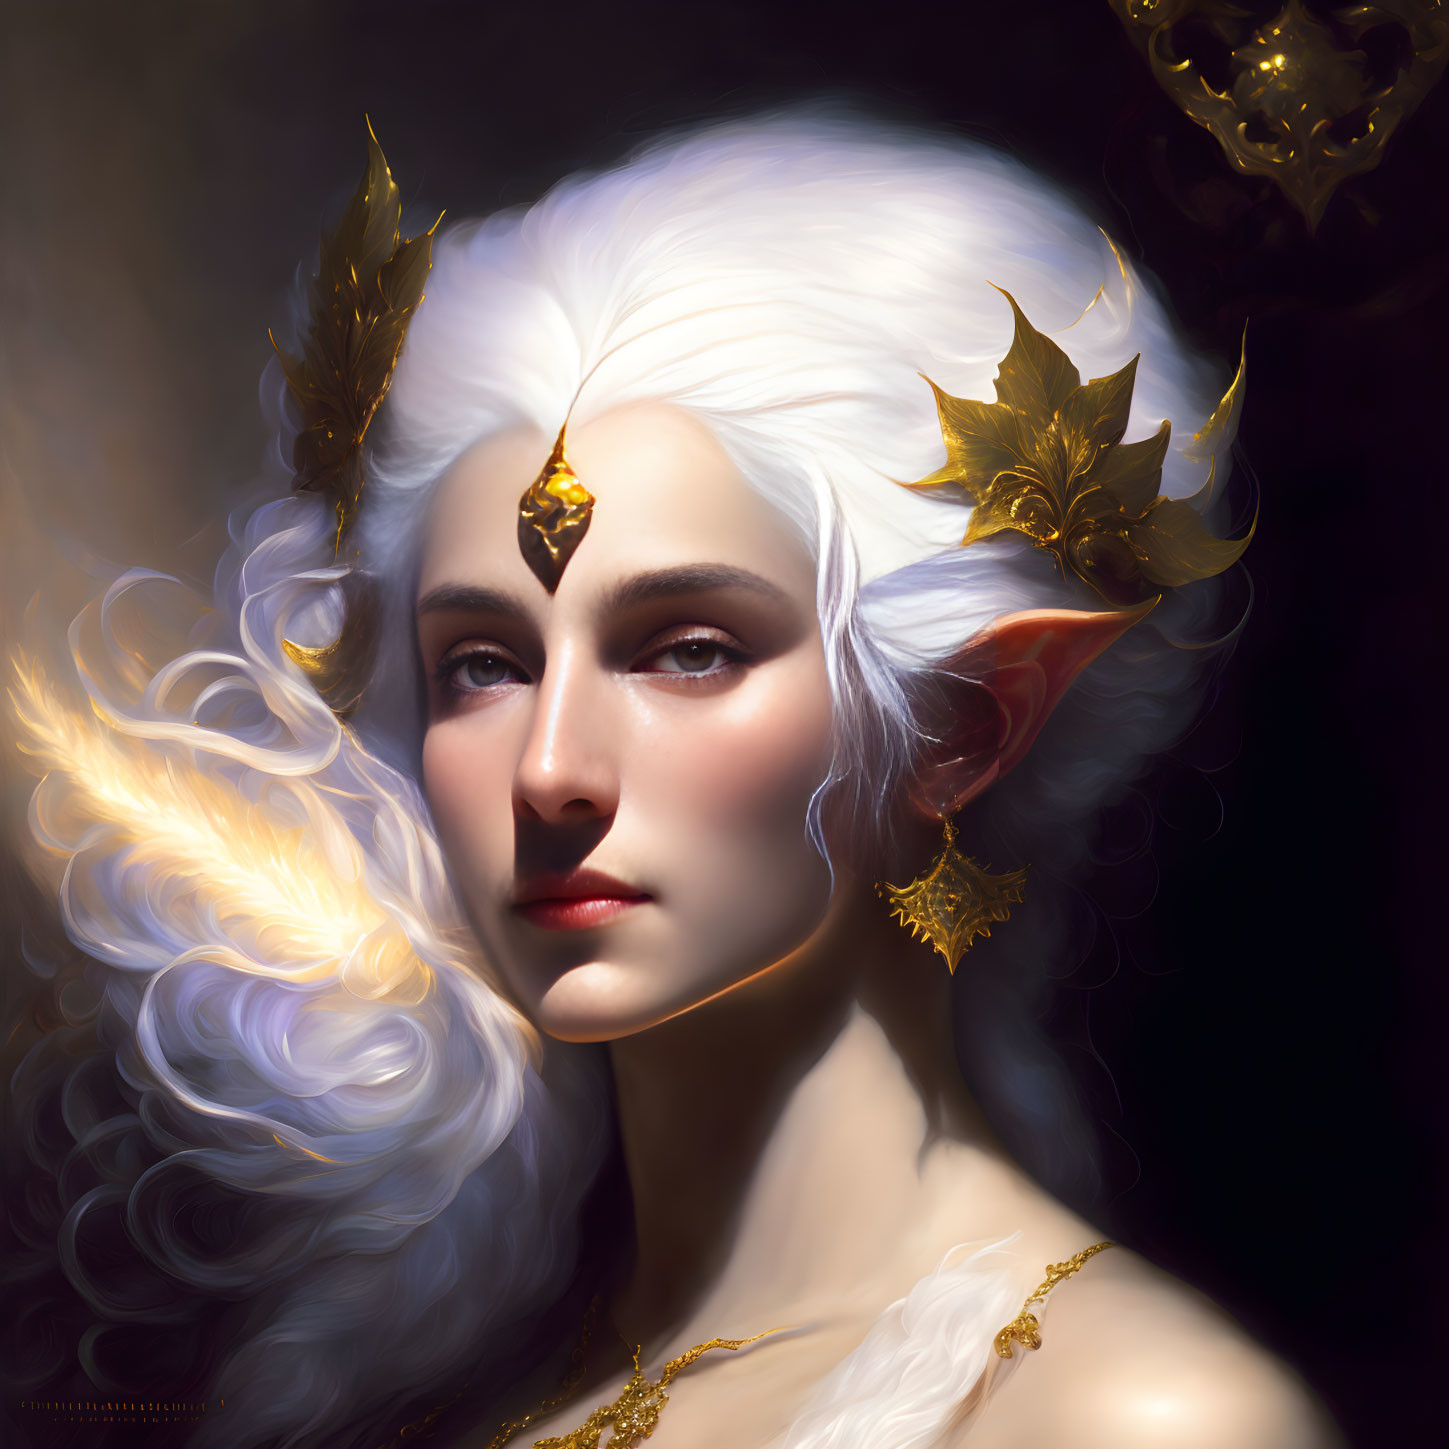 Fantasy character with white hair, leaf crown, and jewelry on dark background